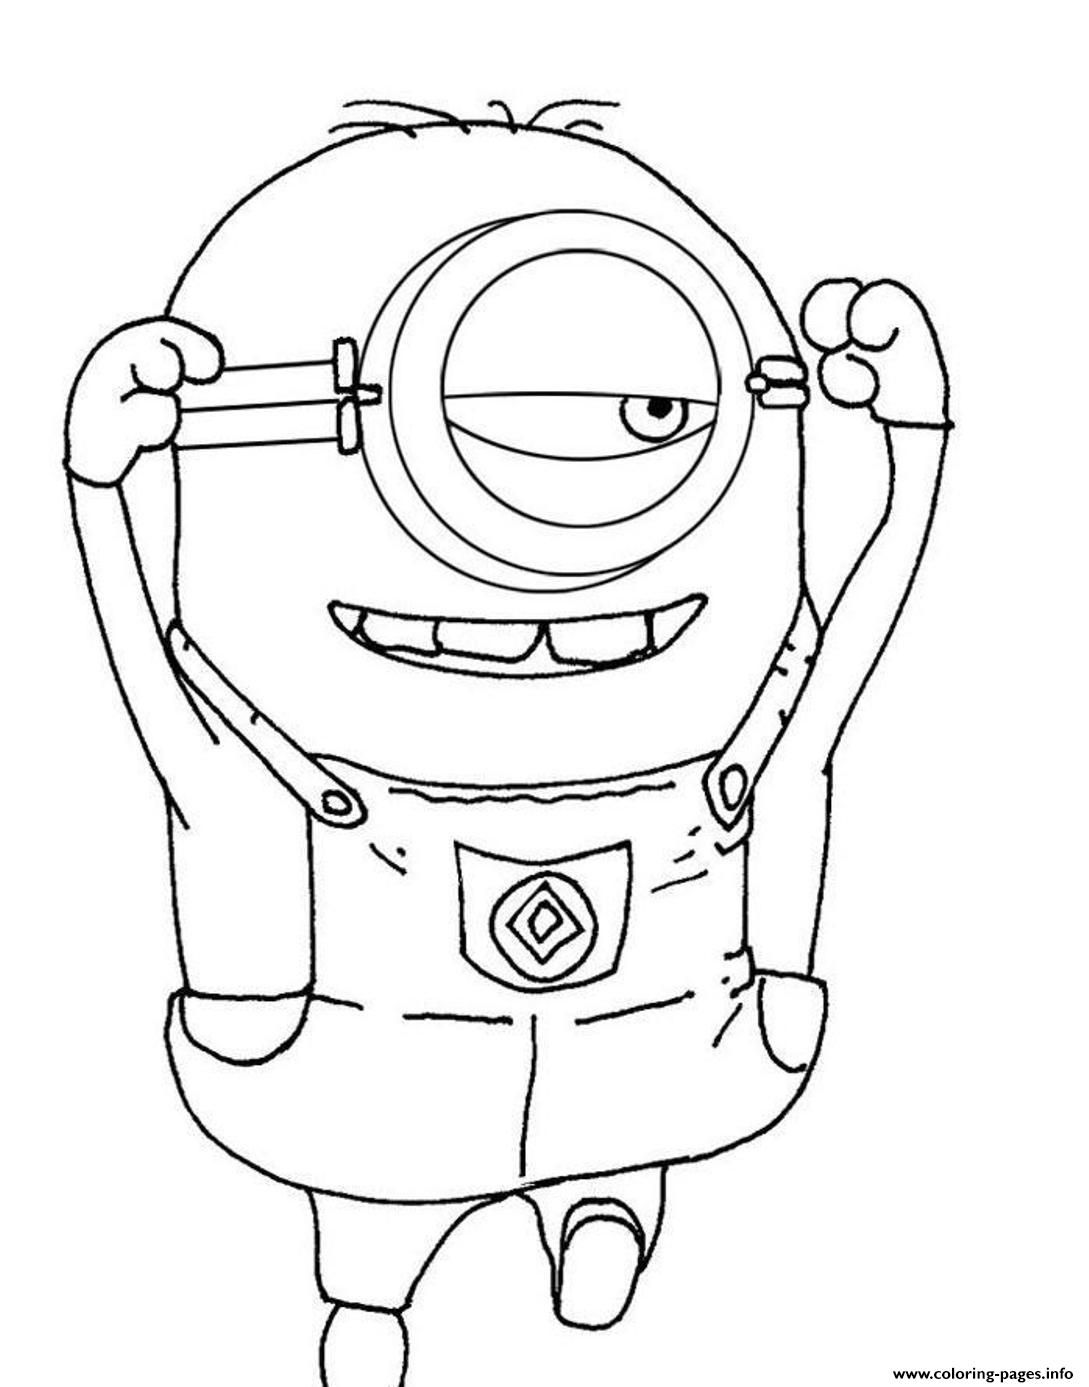 minions-coloring-page-0061-q1